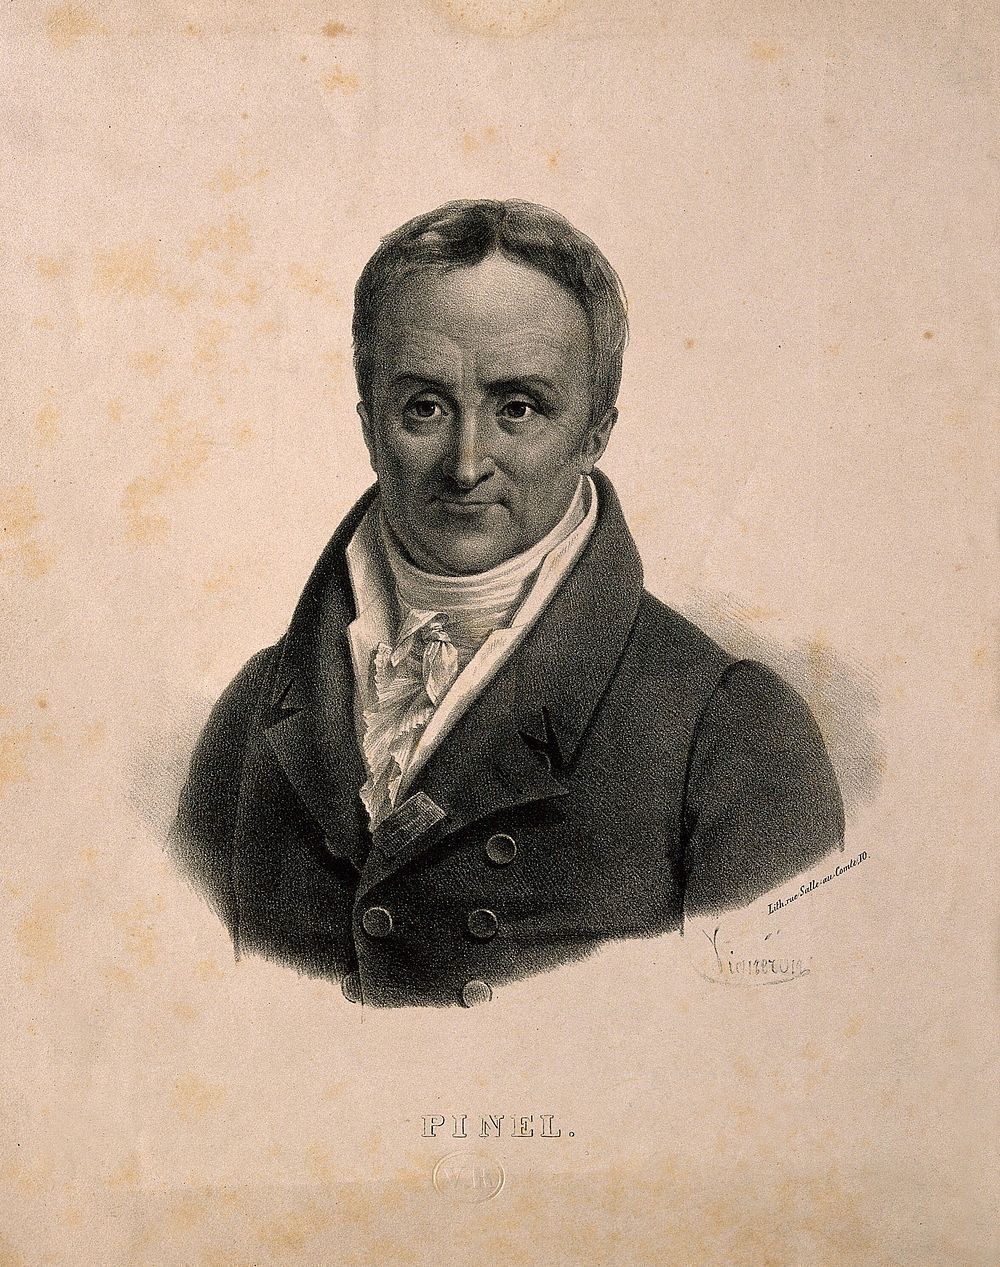 Philippe Pinel. Lithograph by P. R. Vignéron.